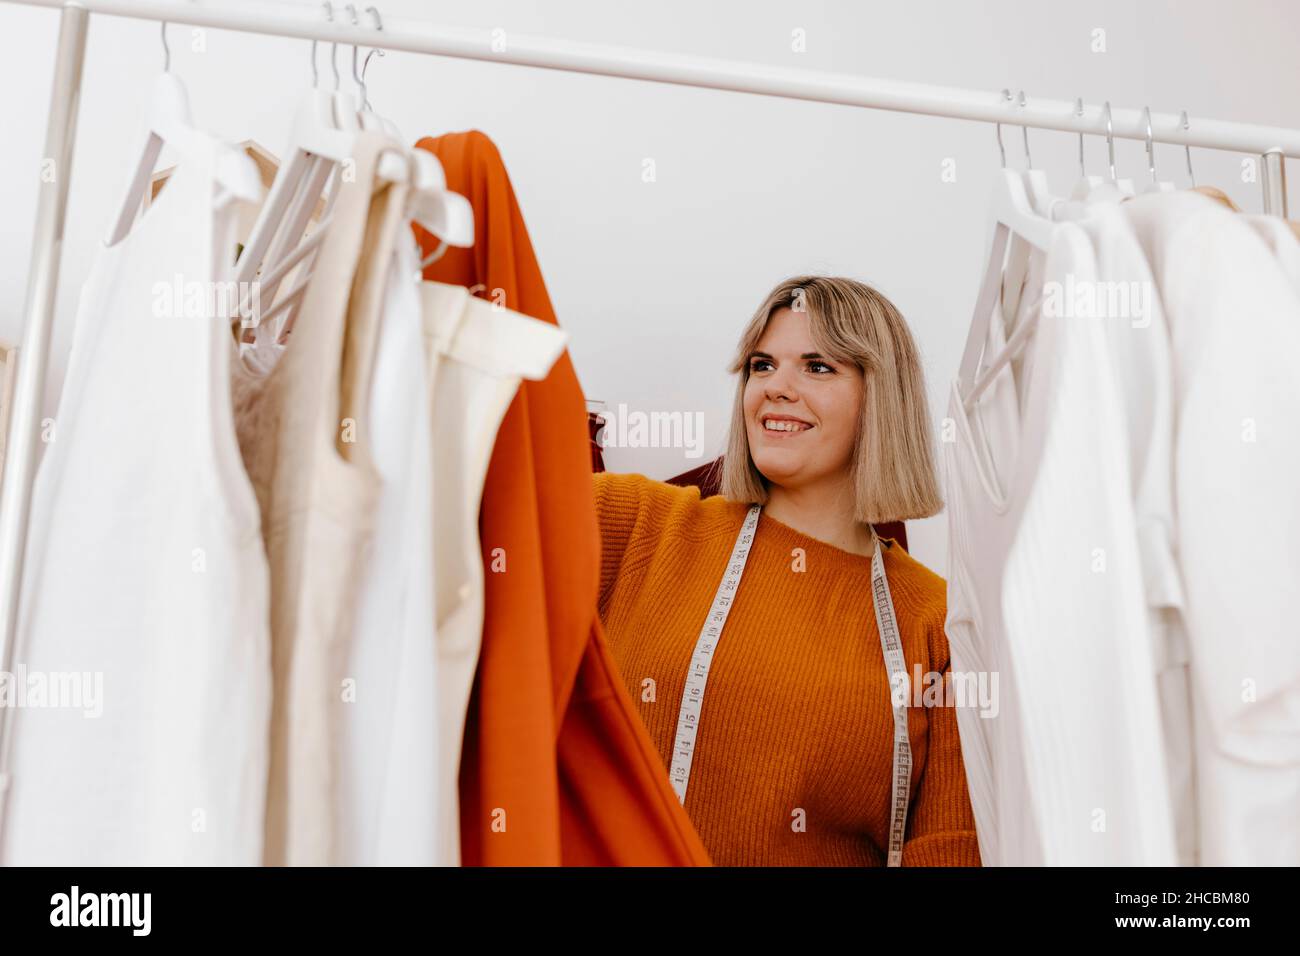 Businesswoman looking at dress hanging on clothes rack at workshop Stock Photo